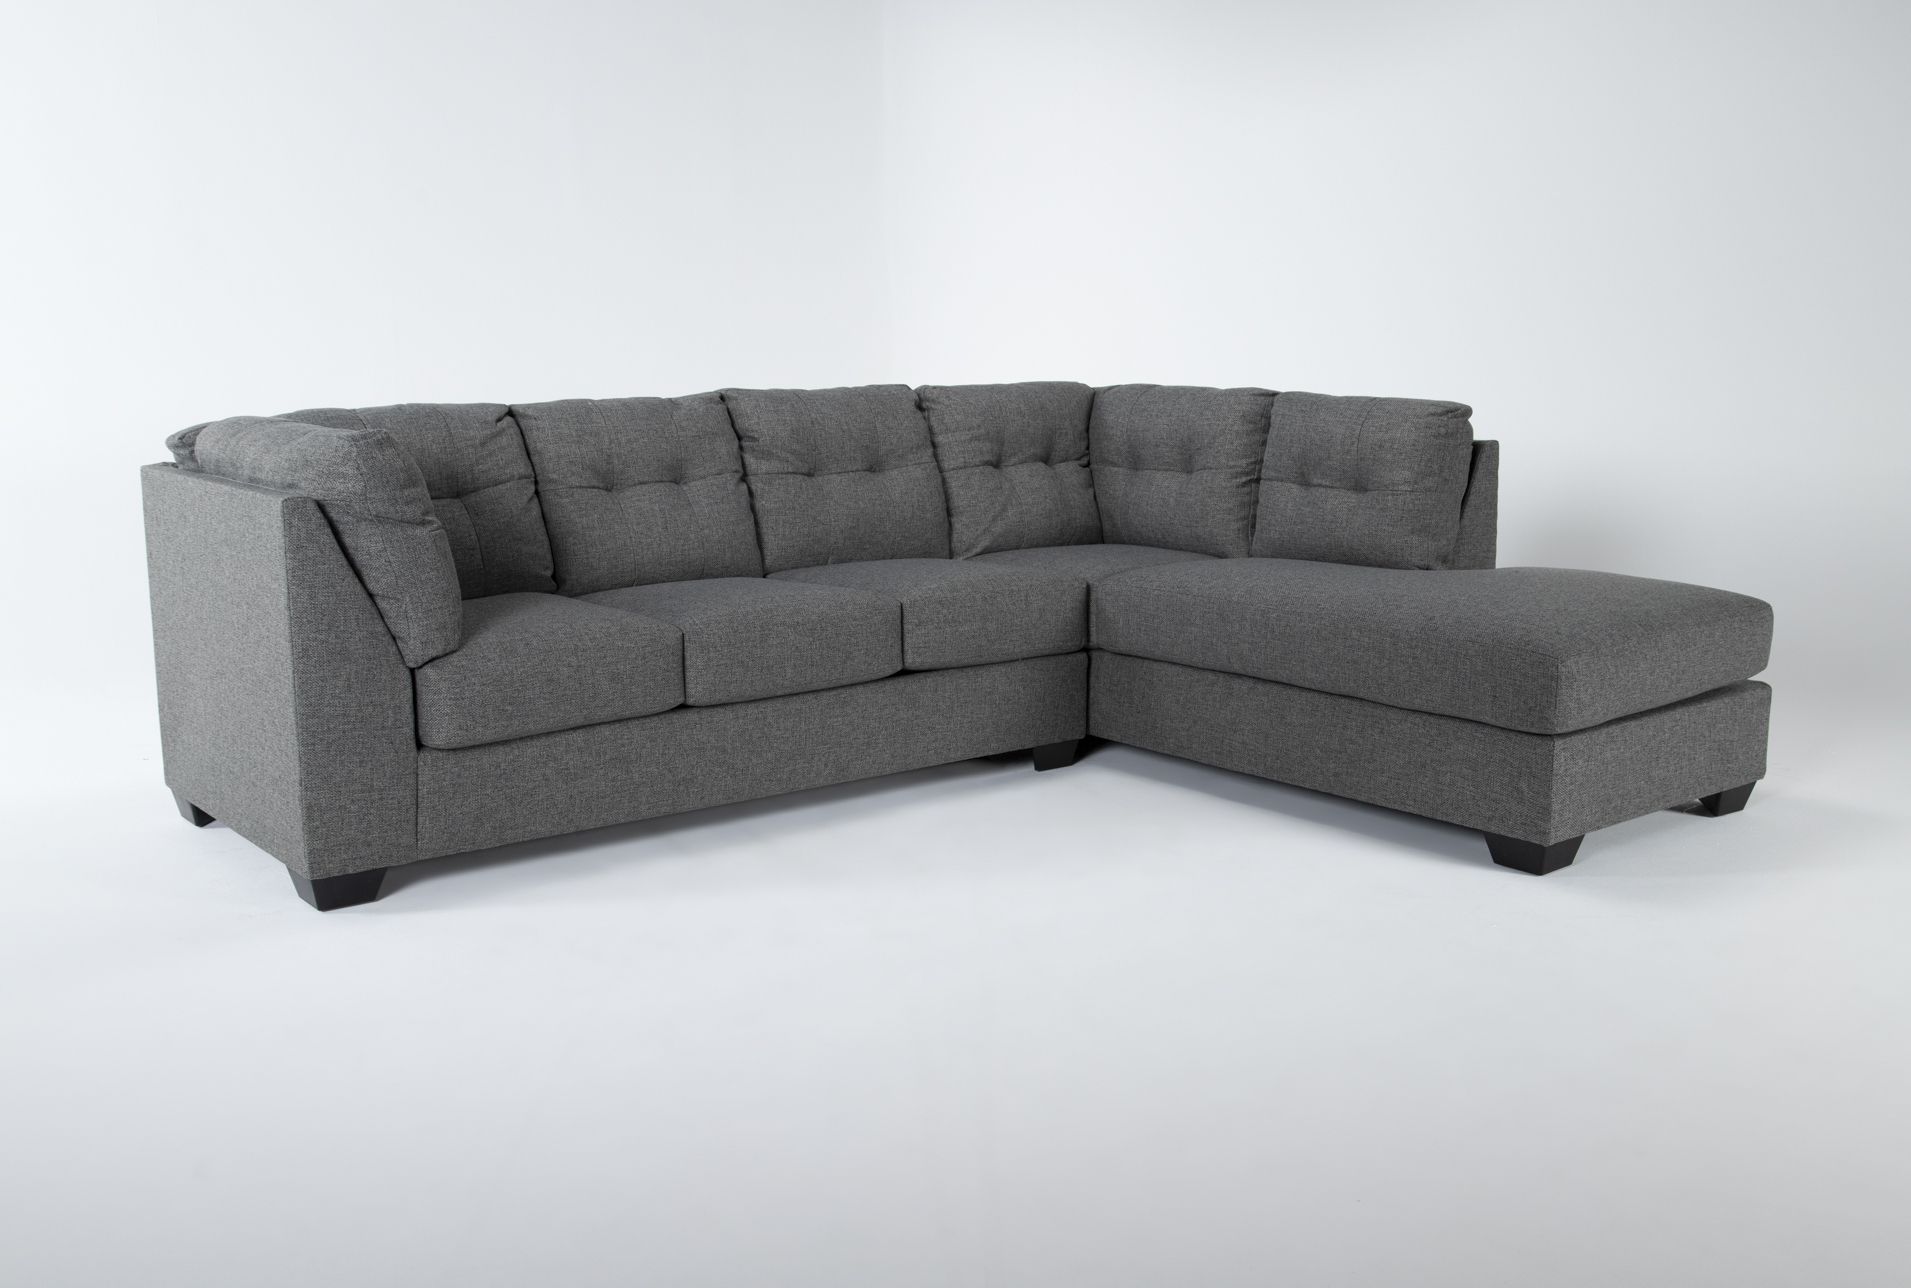 Arrowmask Charcoal 2 Piece 115" Full Sleeper Sectional With Left Arm Pertaining To Left Or Right Facing Sleeper Sectionals (View 9 of 20)